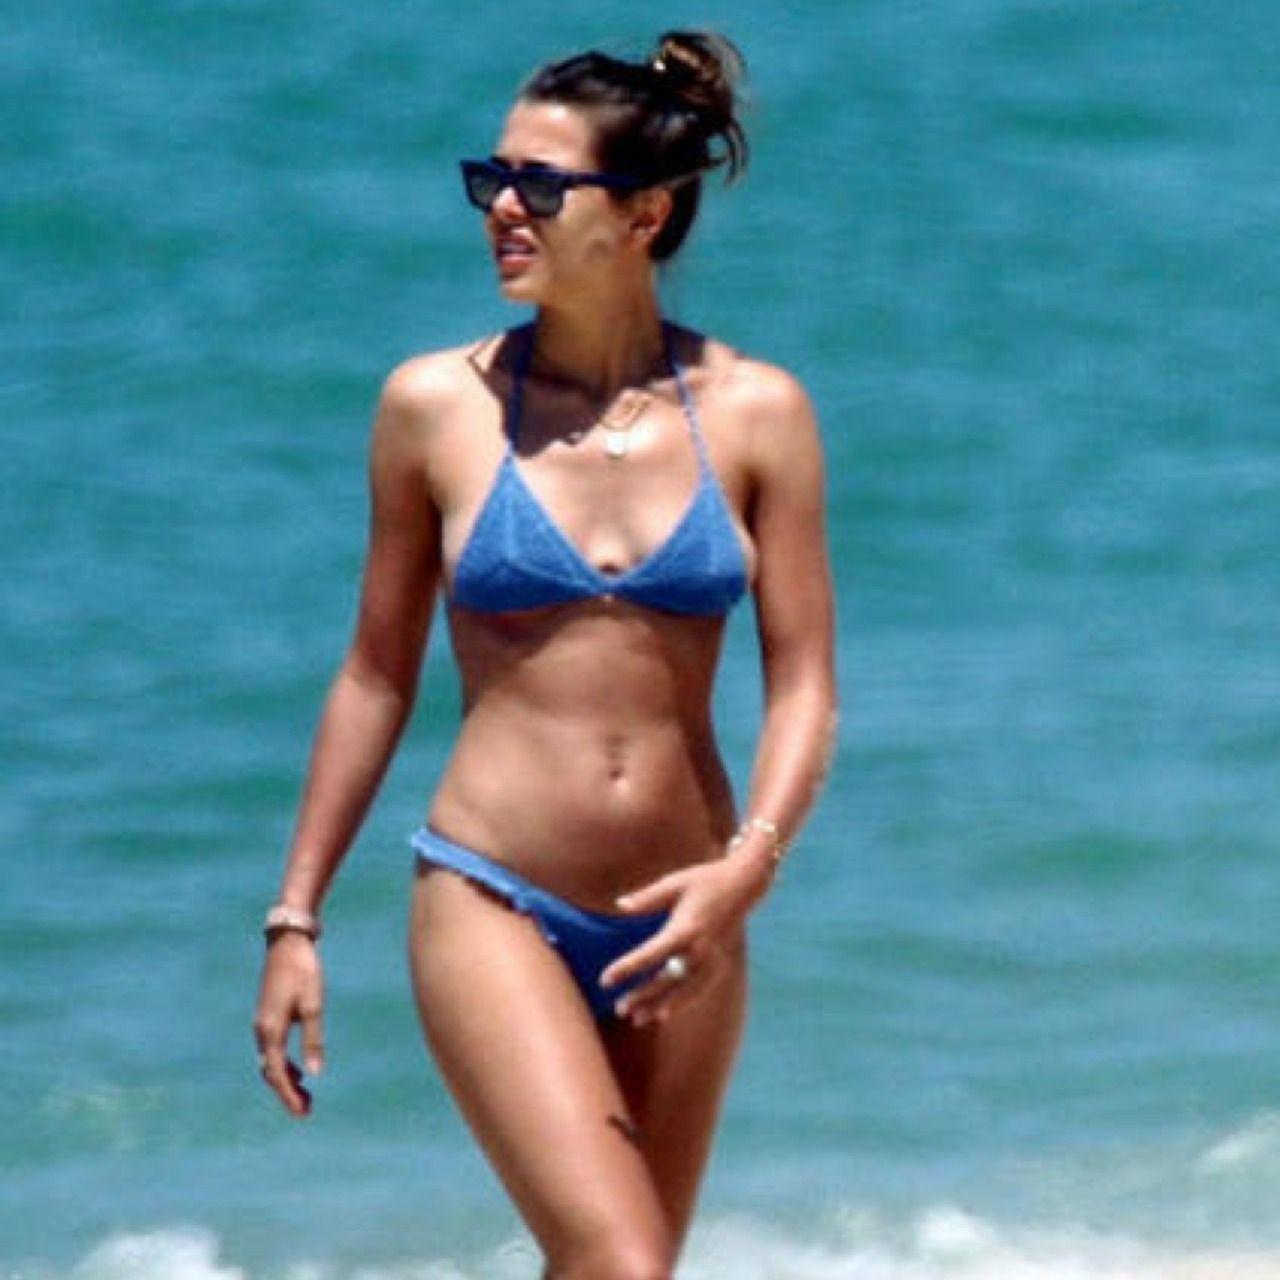 44 Hot And Sexy Pictures Of Charlotte Casiraghi Will Melt You